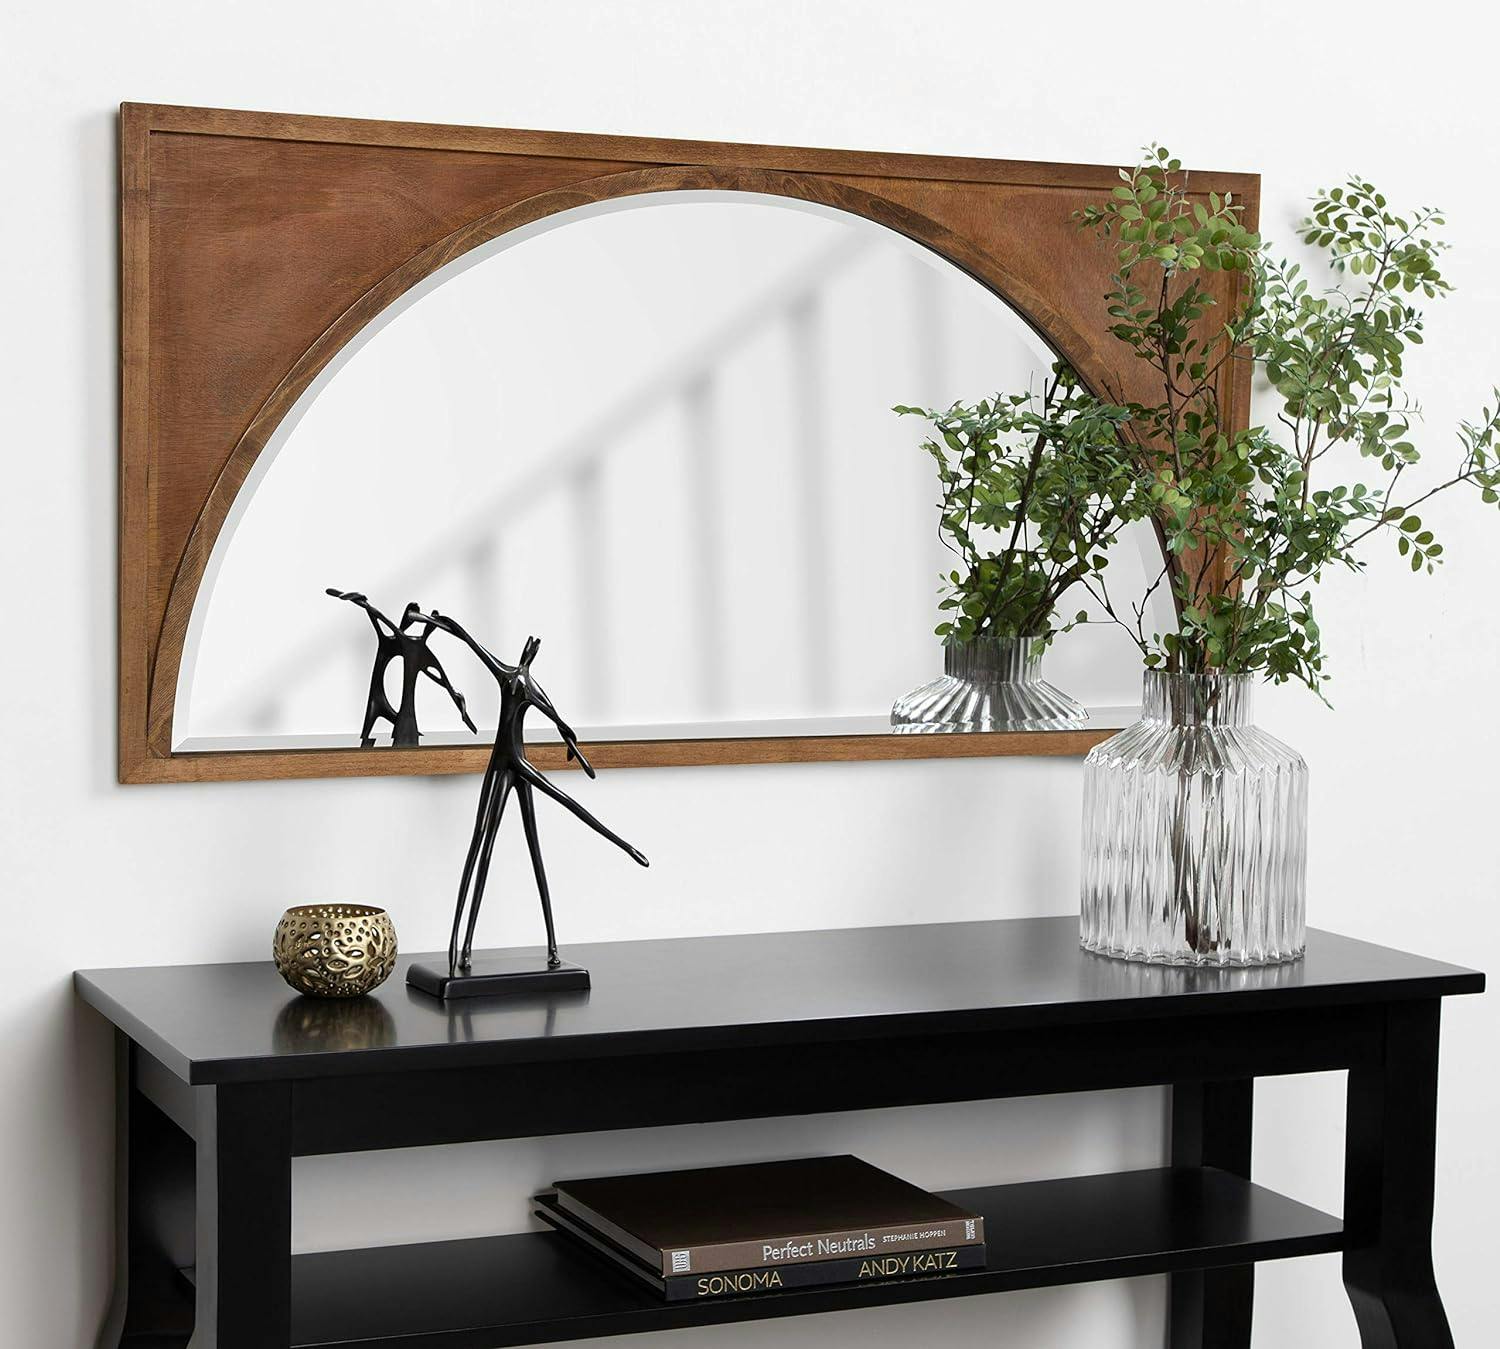 Andover Light Brown Solid Wood Full-Length Arch Mirror